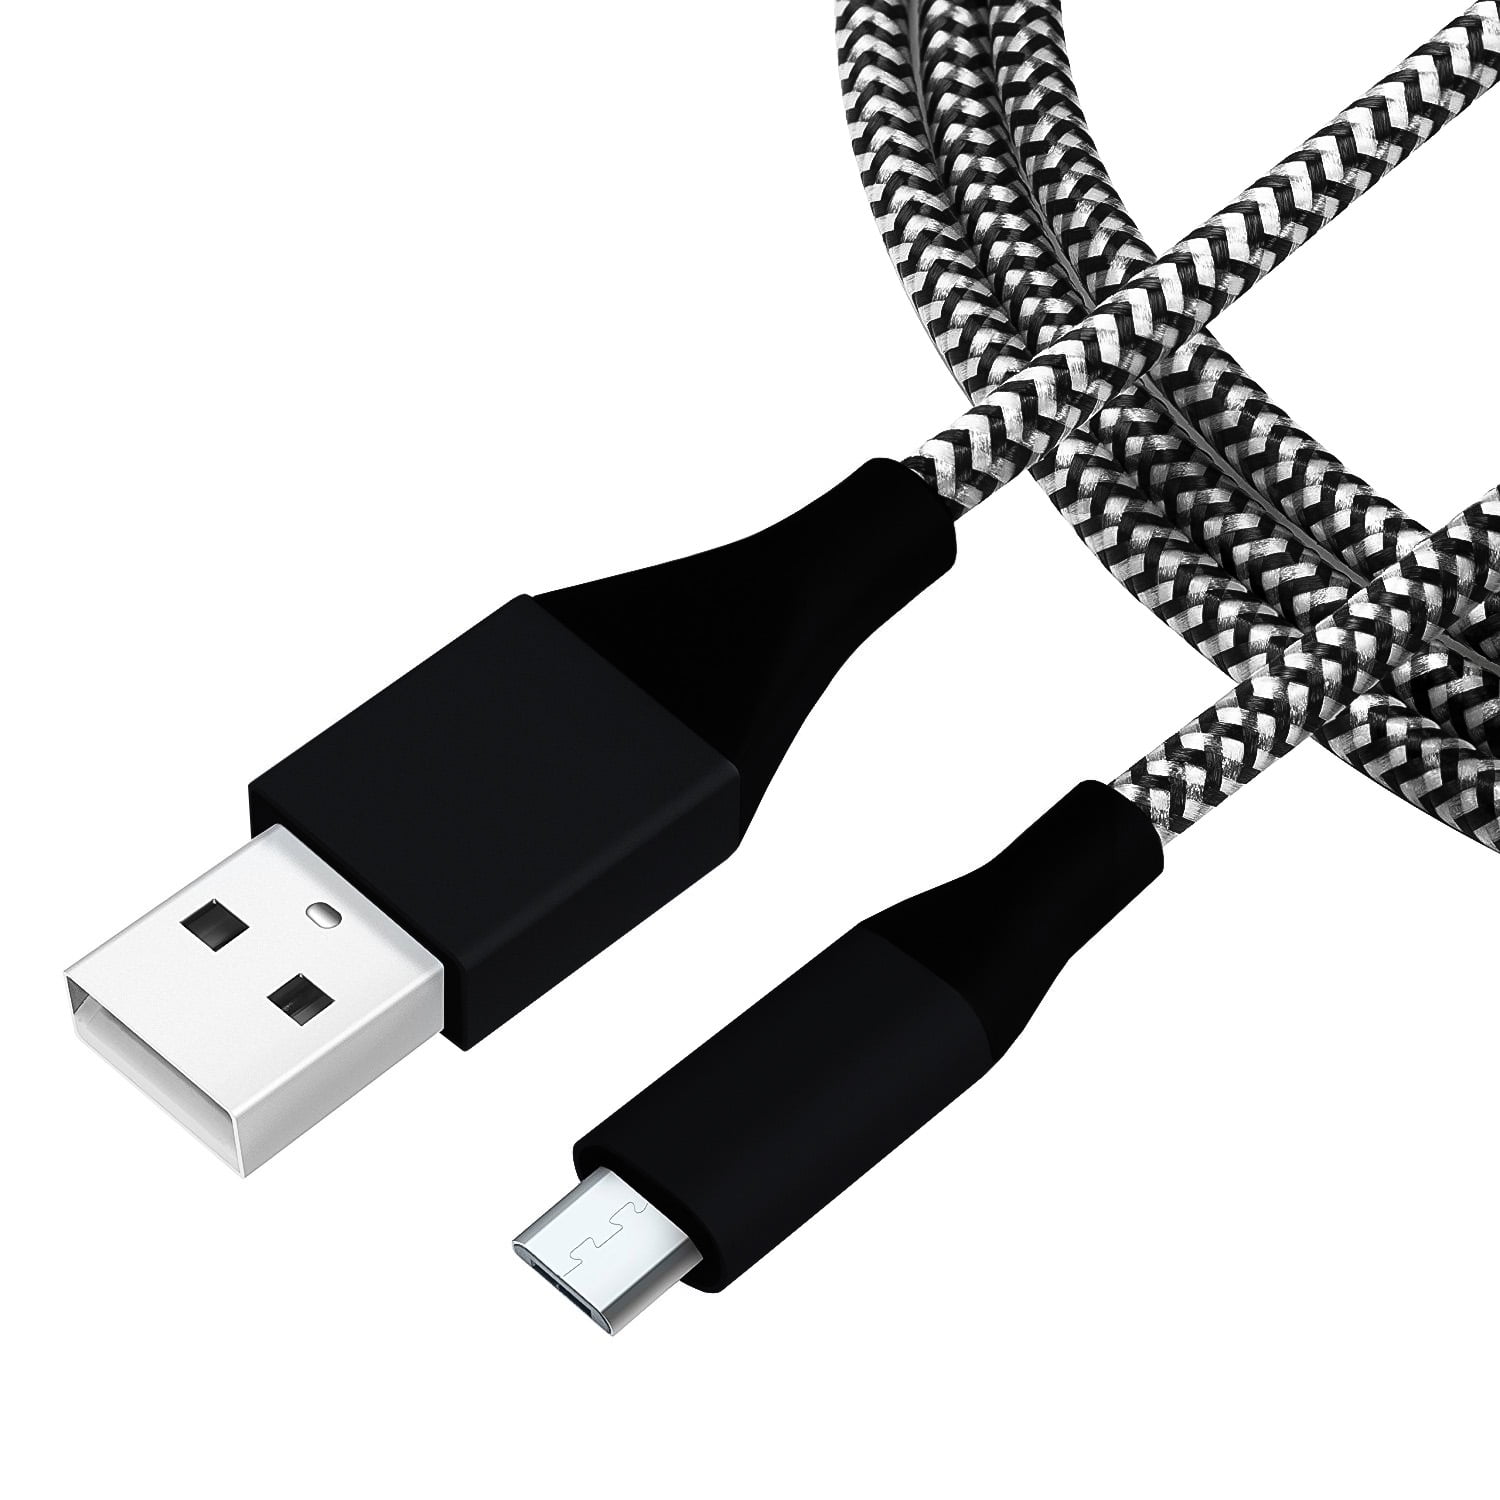 Micro USB to USB 2.0 Cable of 3m Nylon Fast Charging Cable for Huawei Android,Apple Smartphones Kindle Micro USB Cable Android